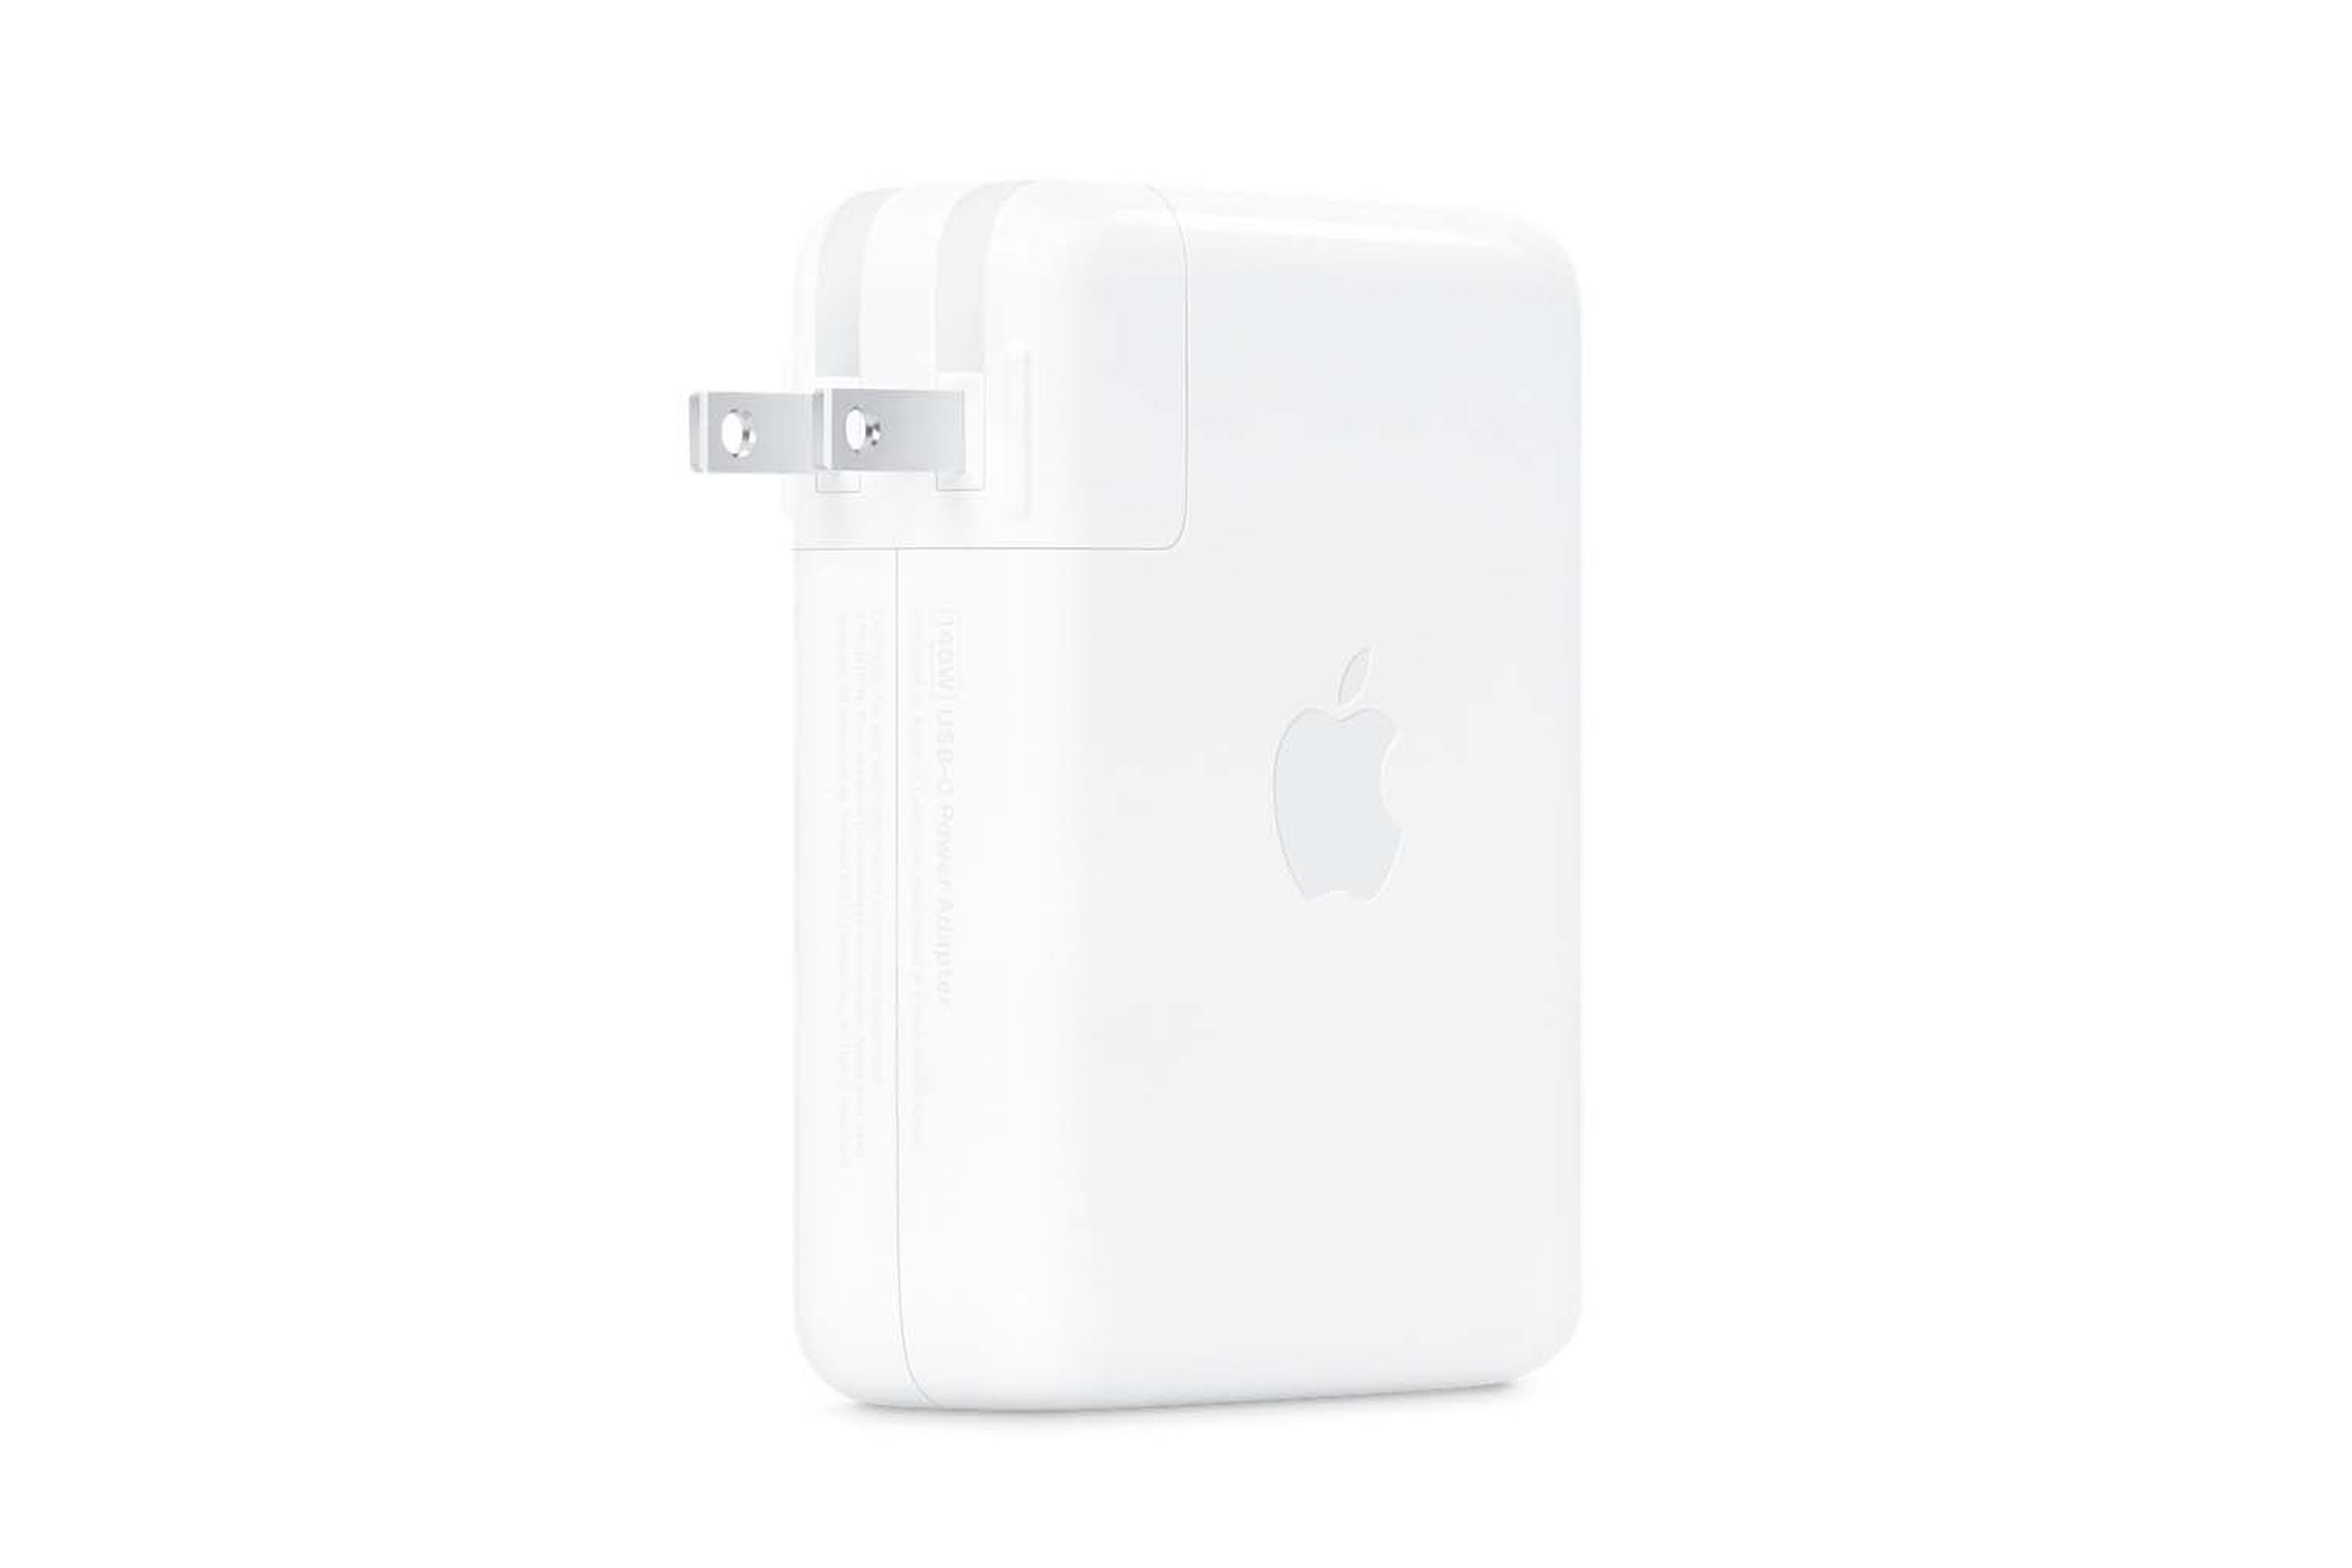 Apple’s new 140W charger.